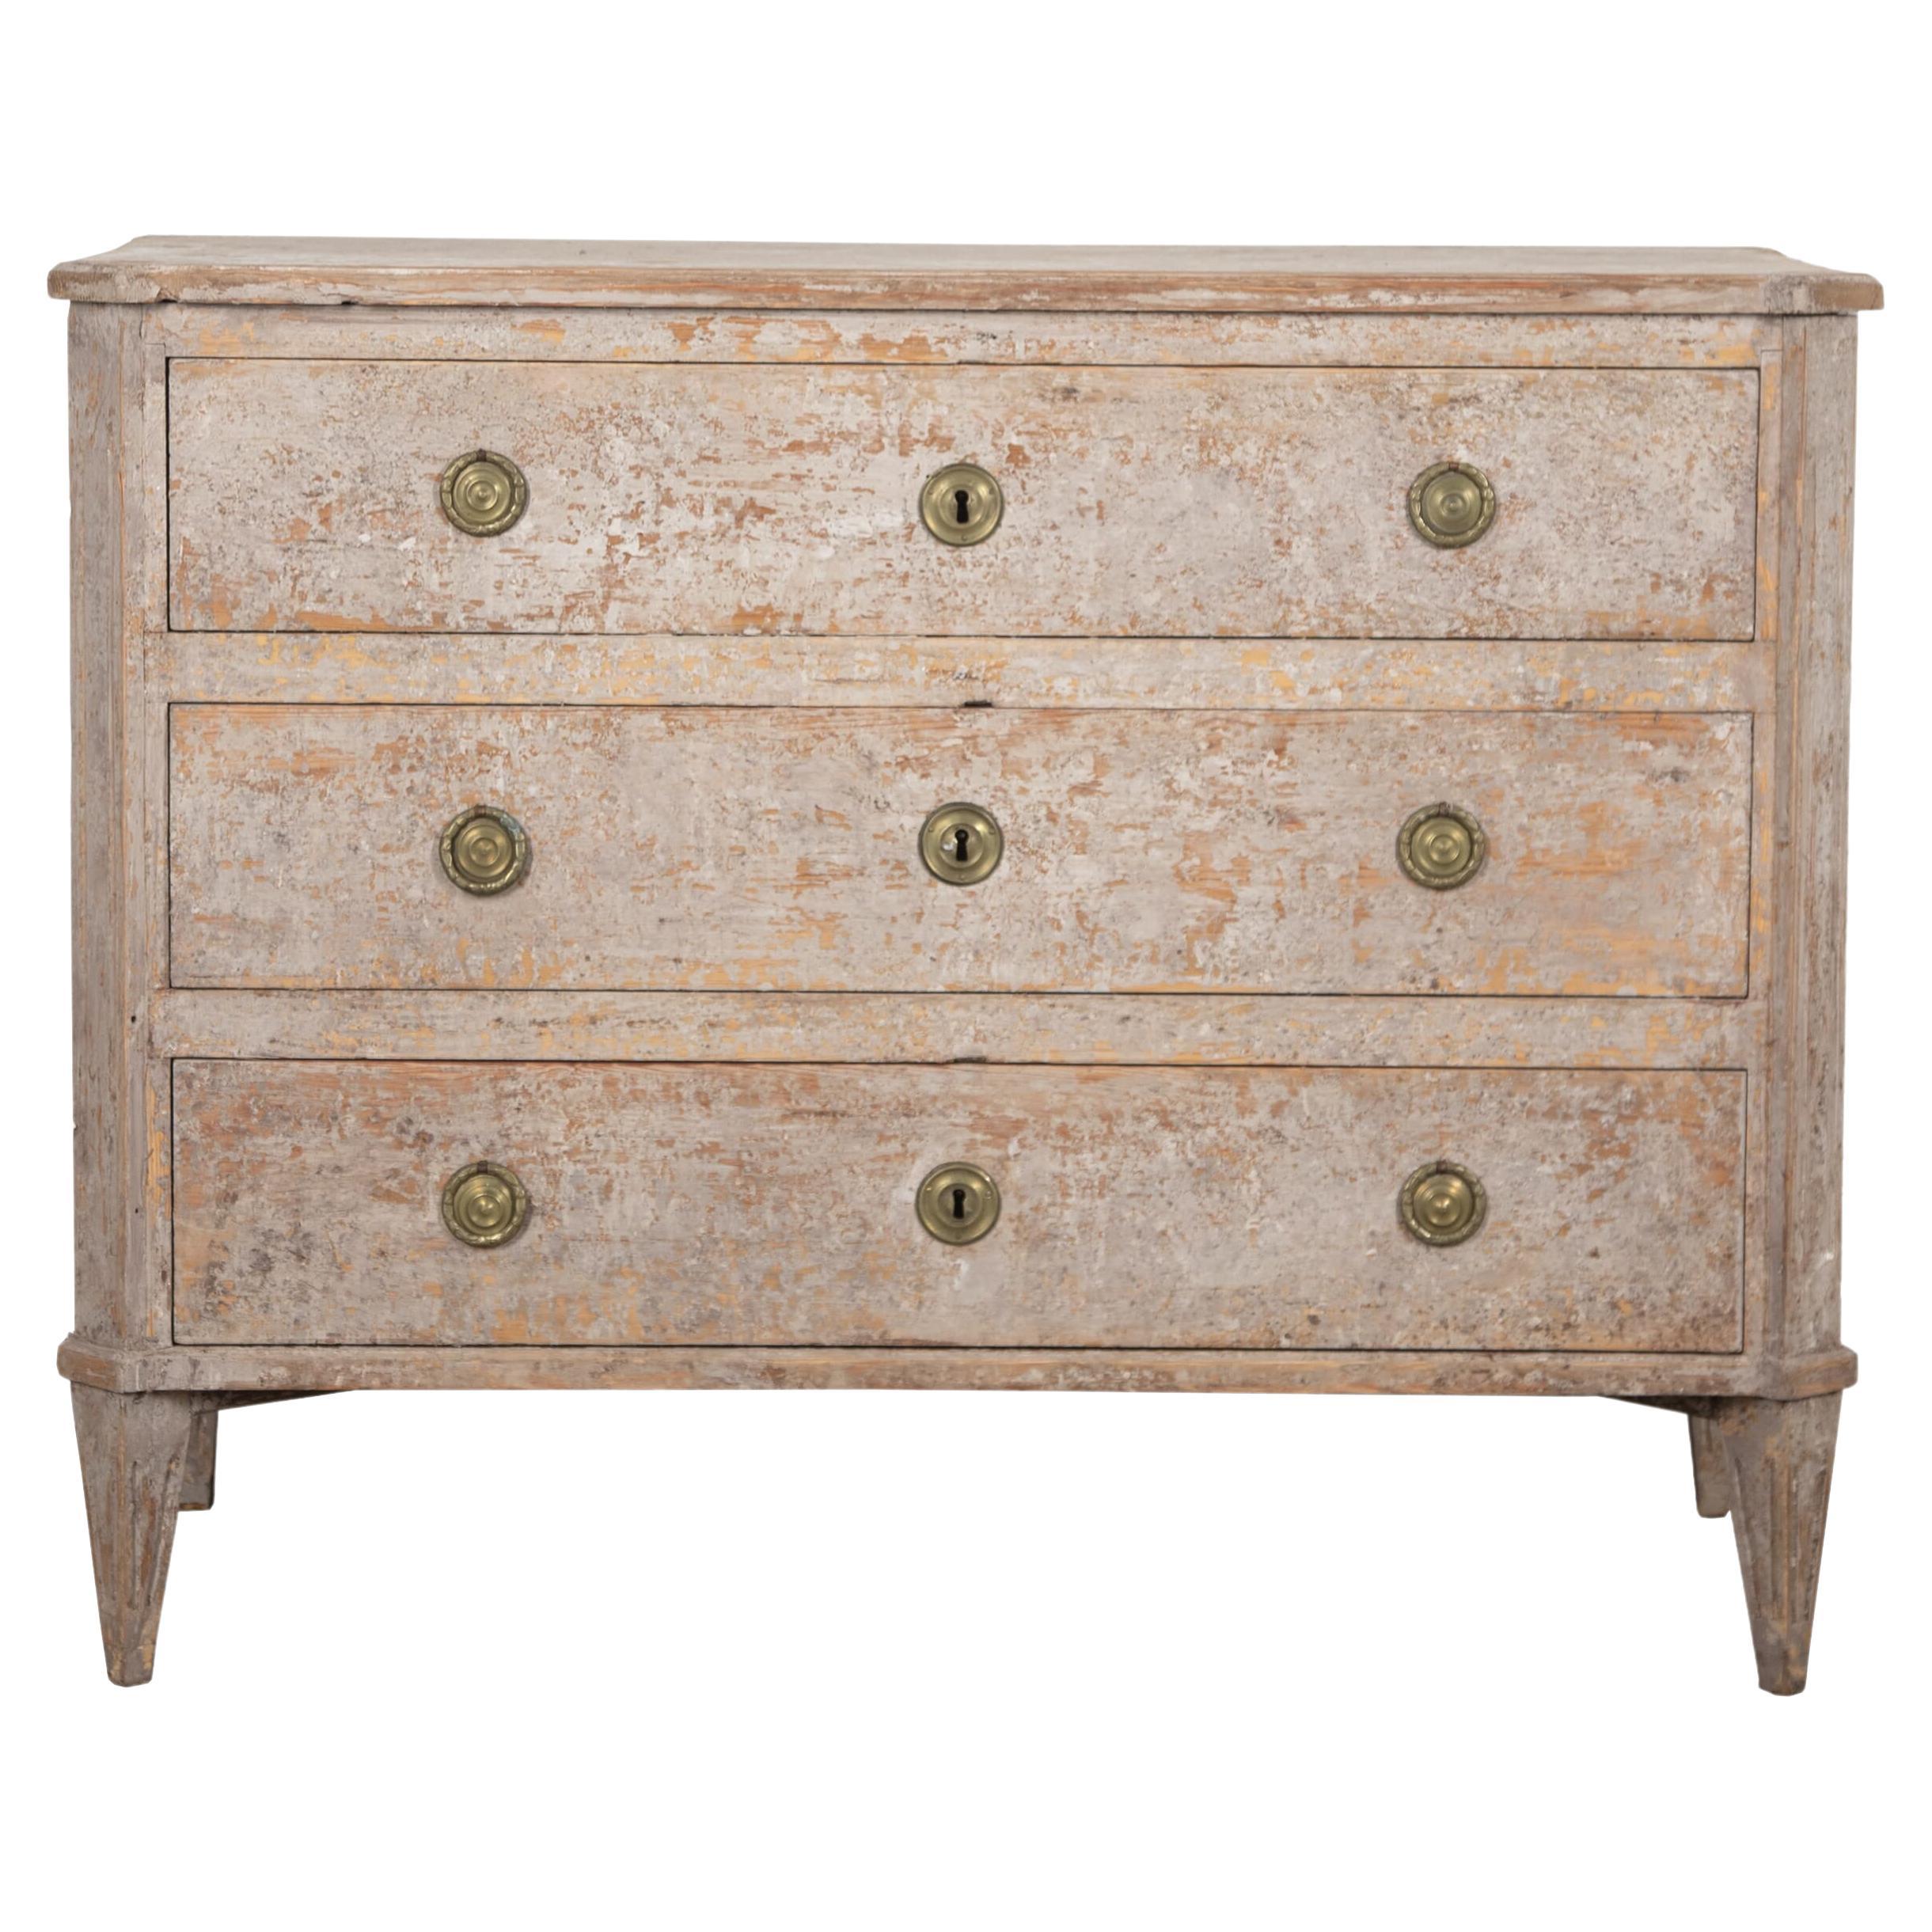 Early 19th Century Gustavian Commode